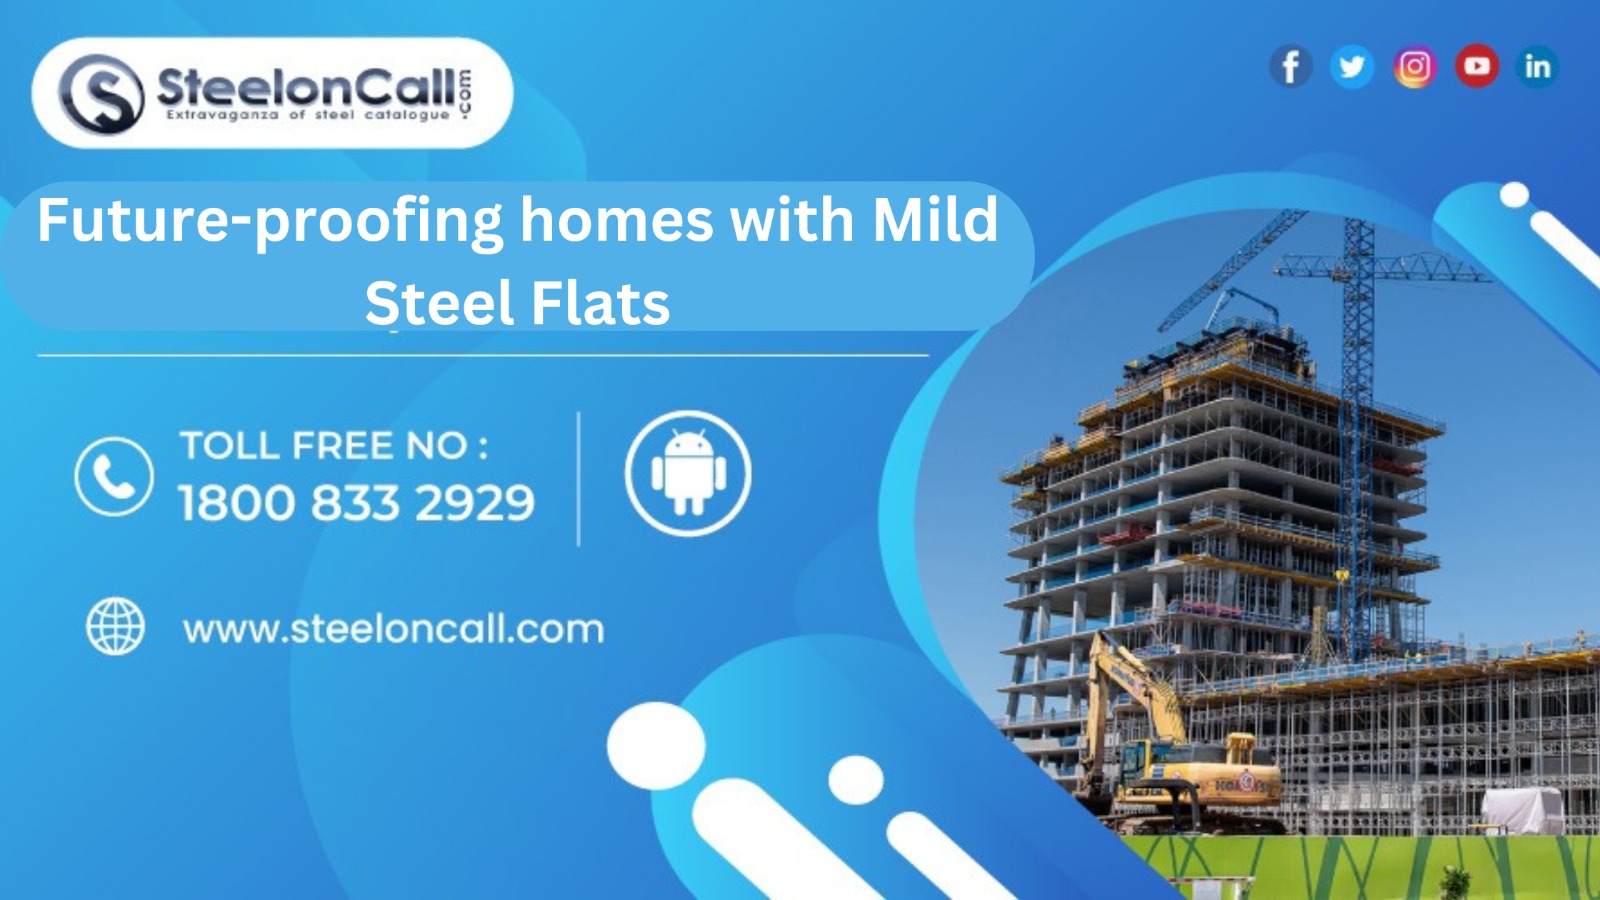 Future-proofing homes with Mild Steel Flats